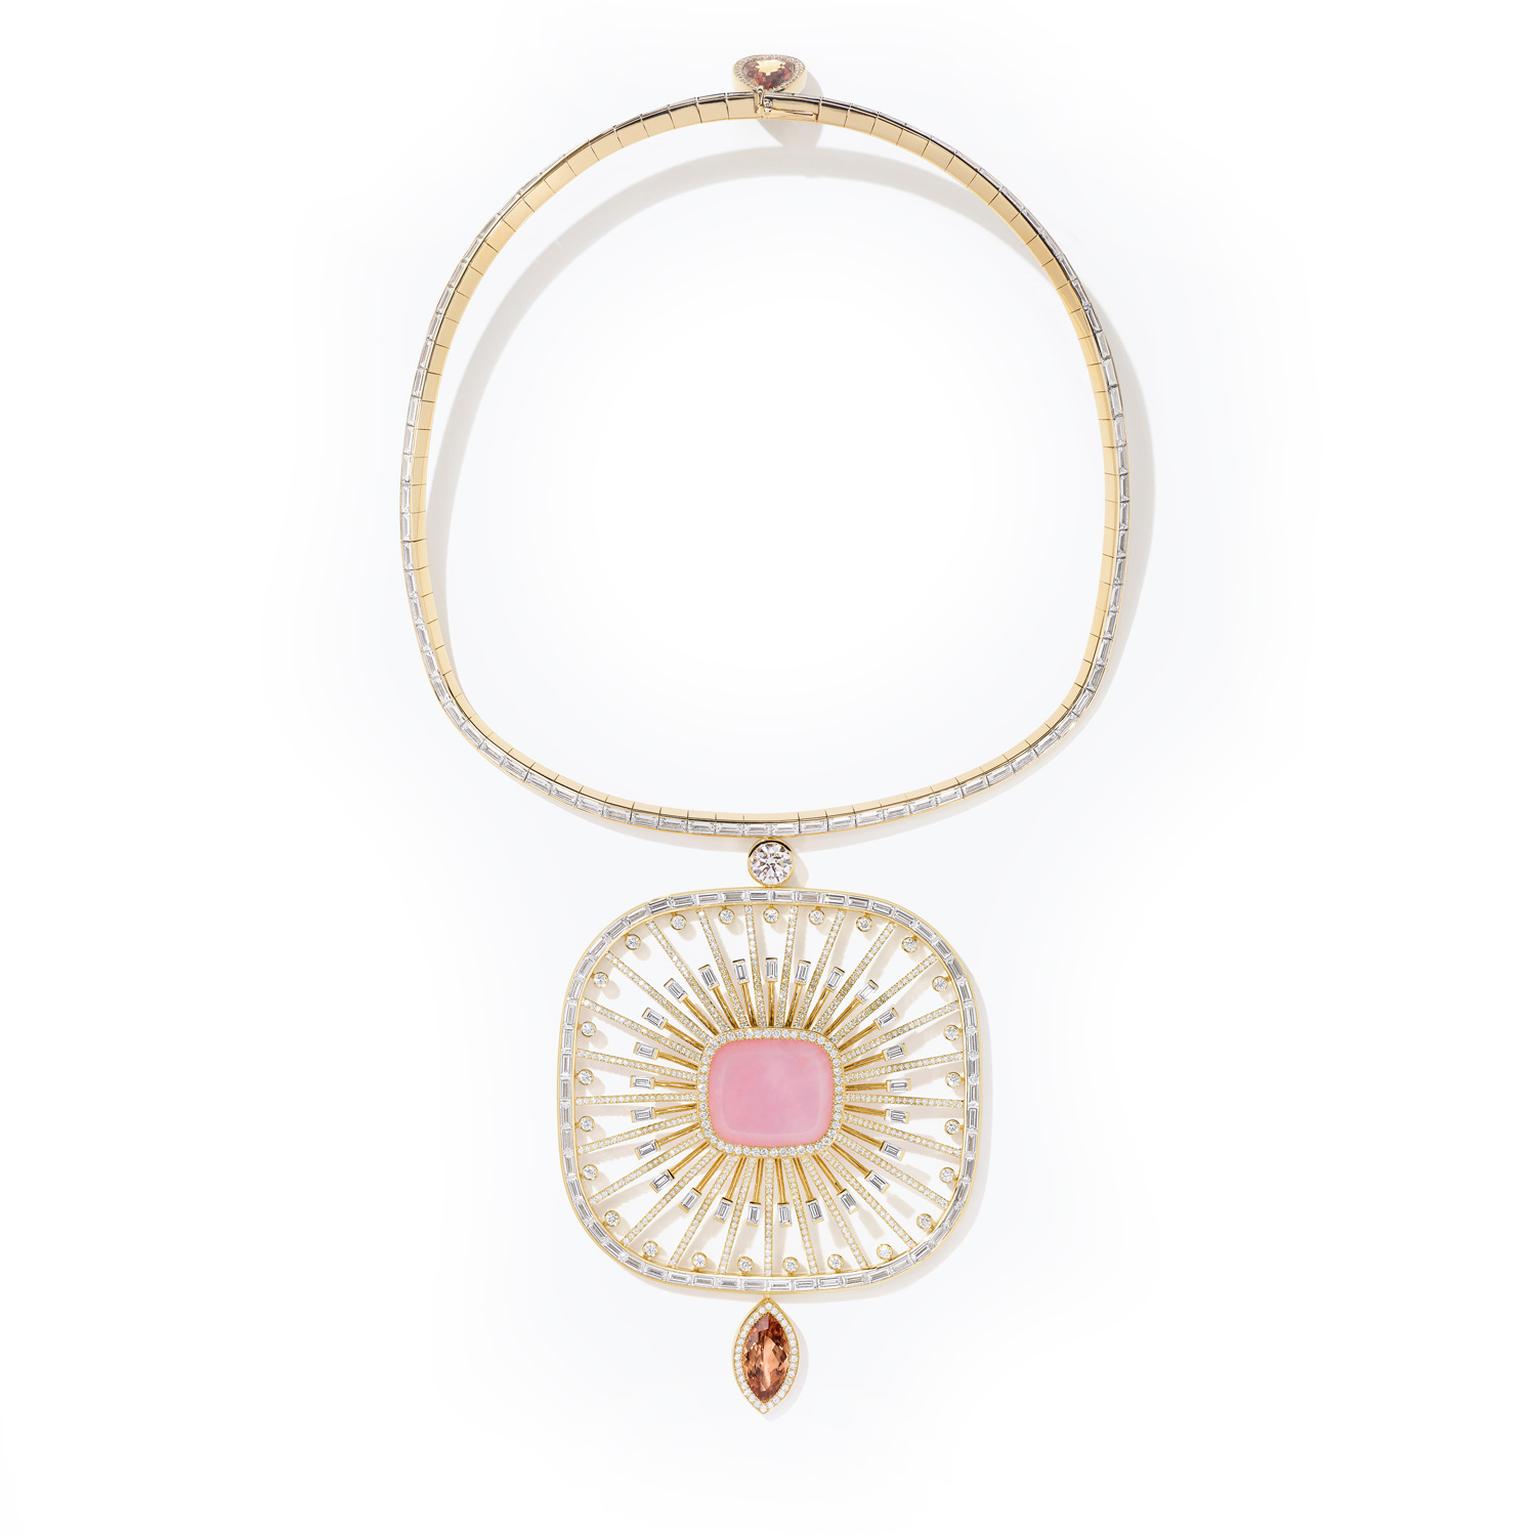 Hermès’ Attelage Céleste pink opal pendant from the HB-IV Continuum collection